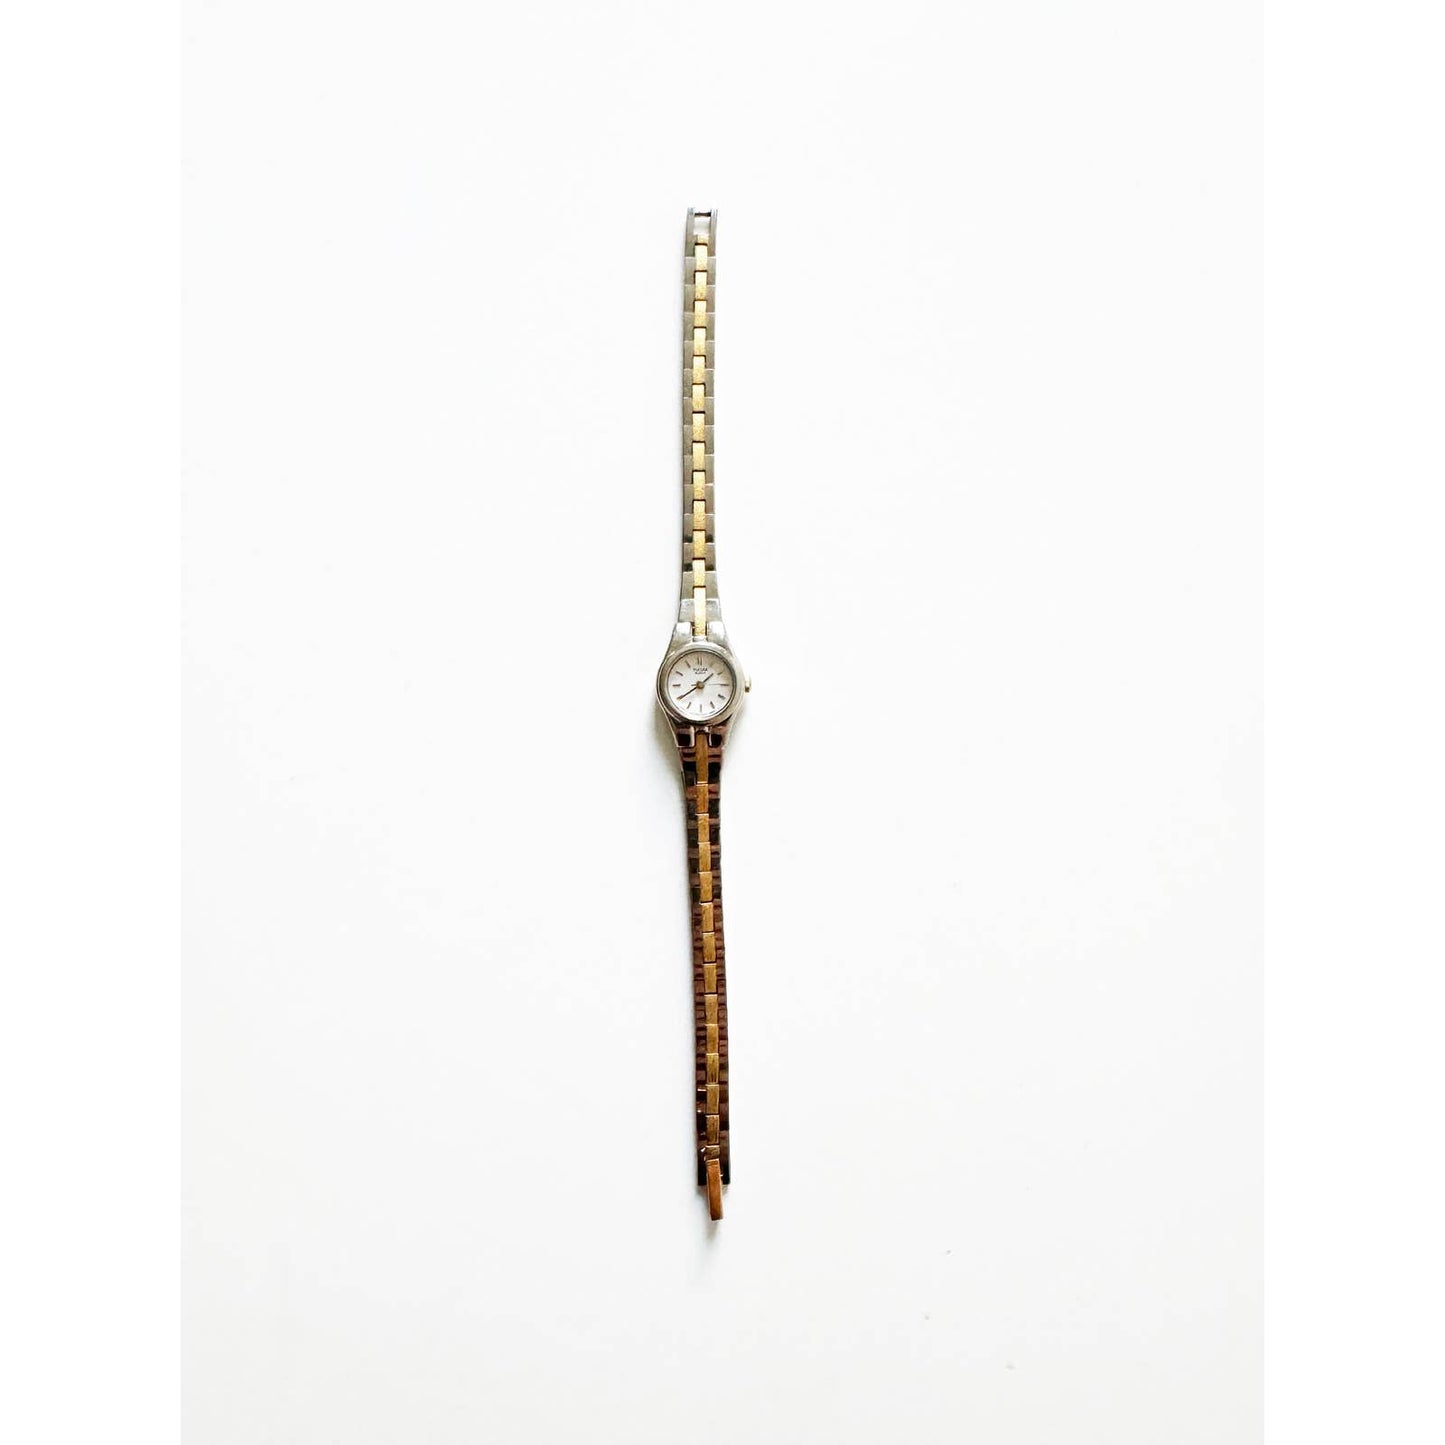 Vintage Small Two Tone Watch with Circular Face | Pulsar